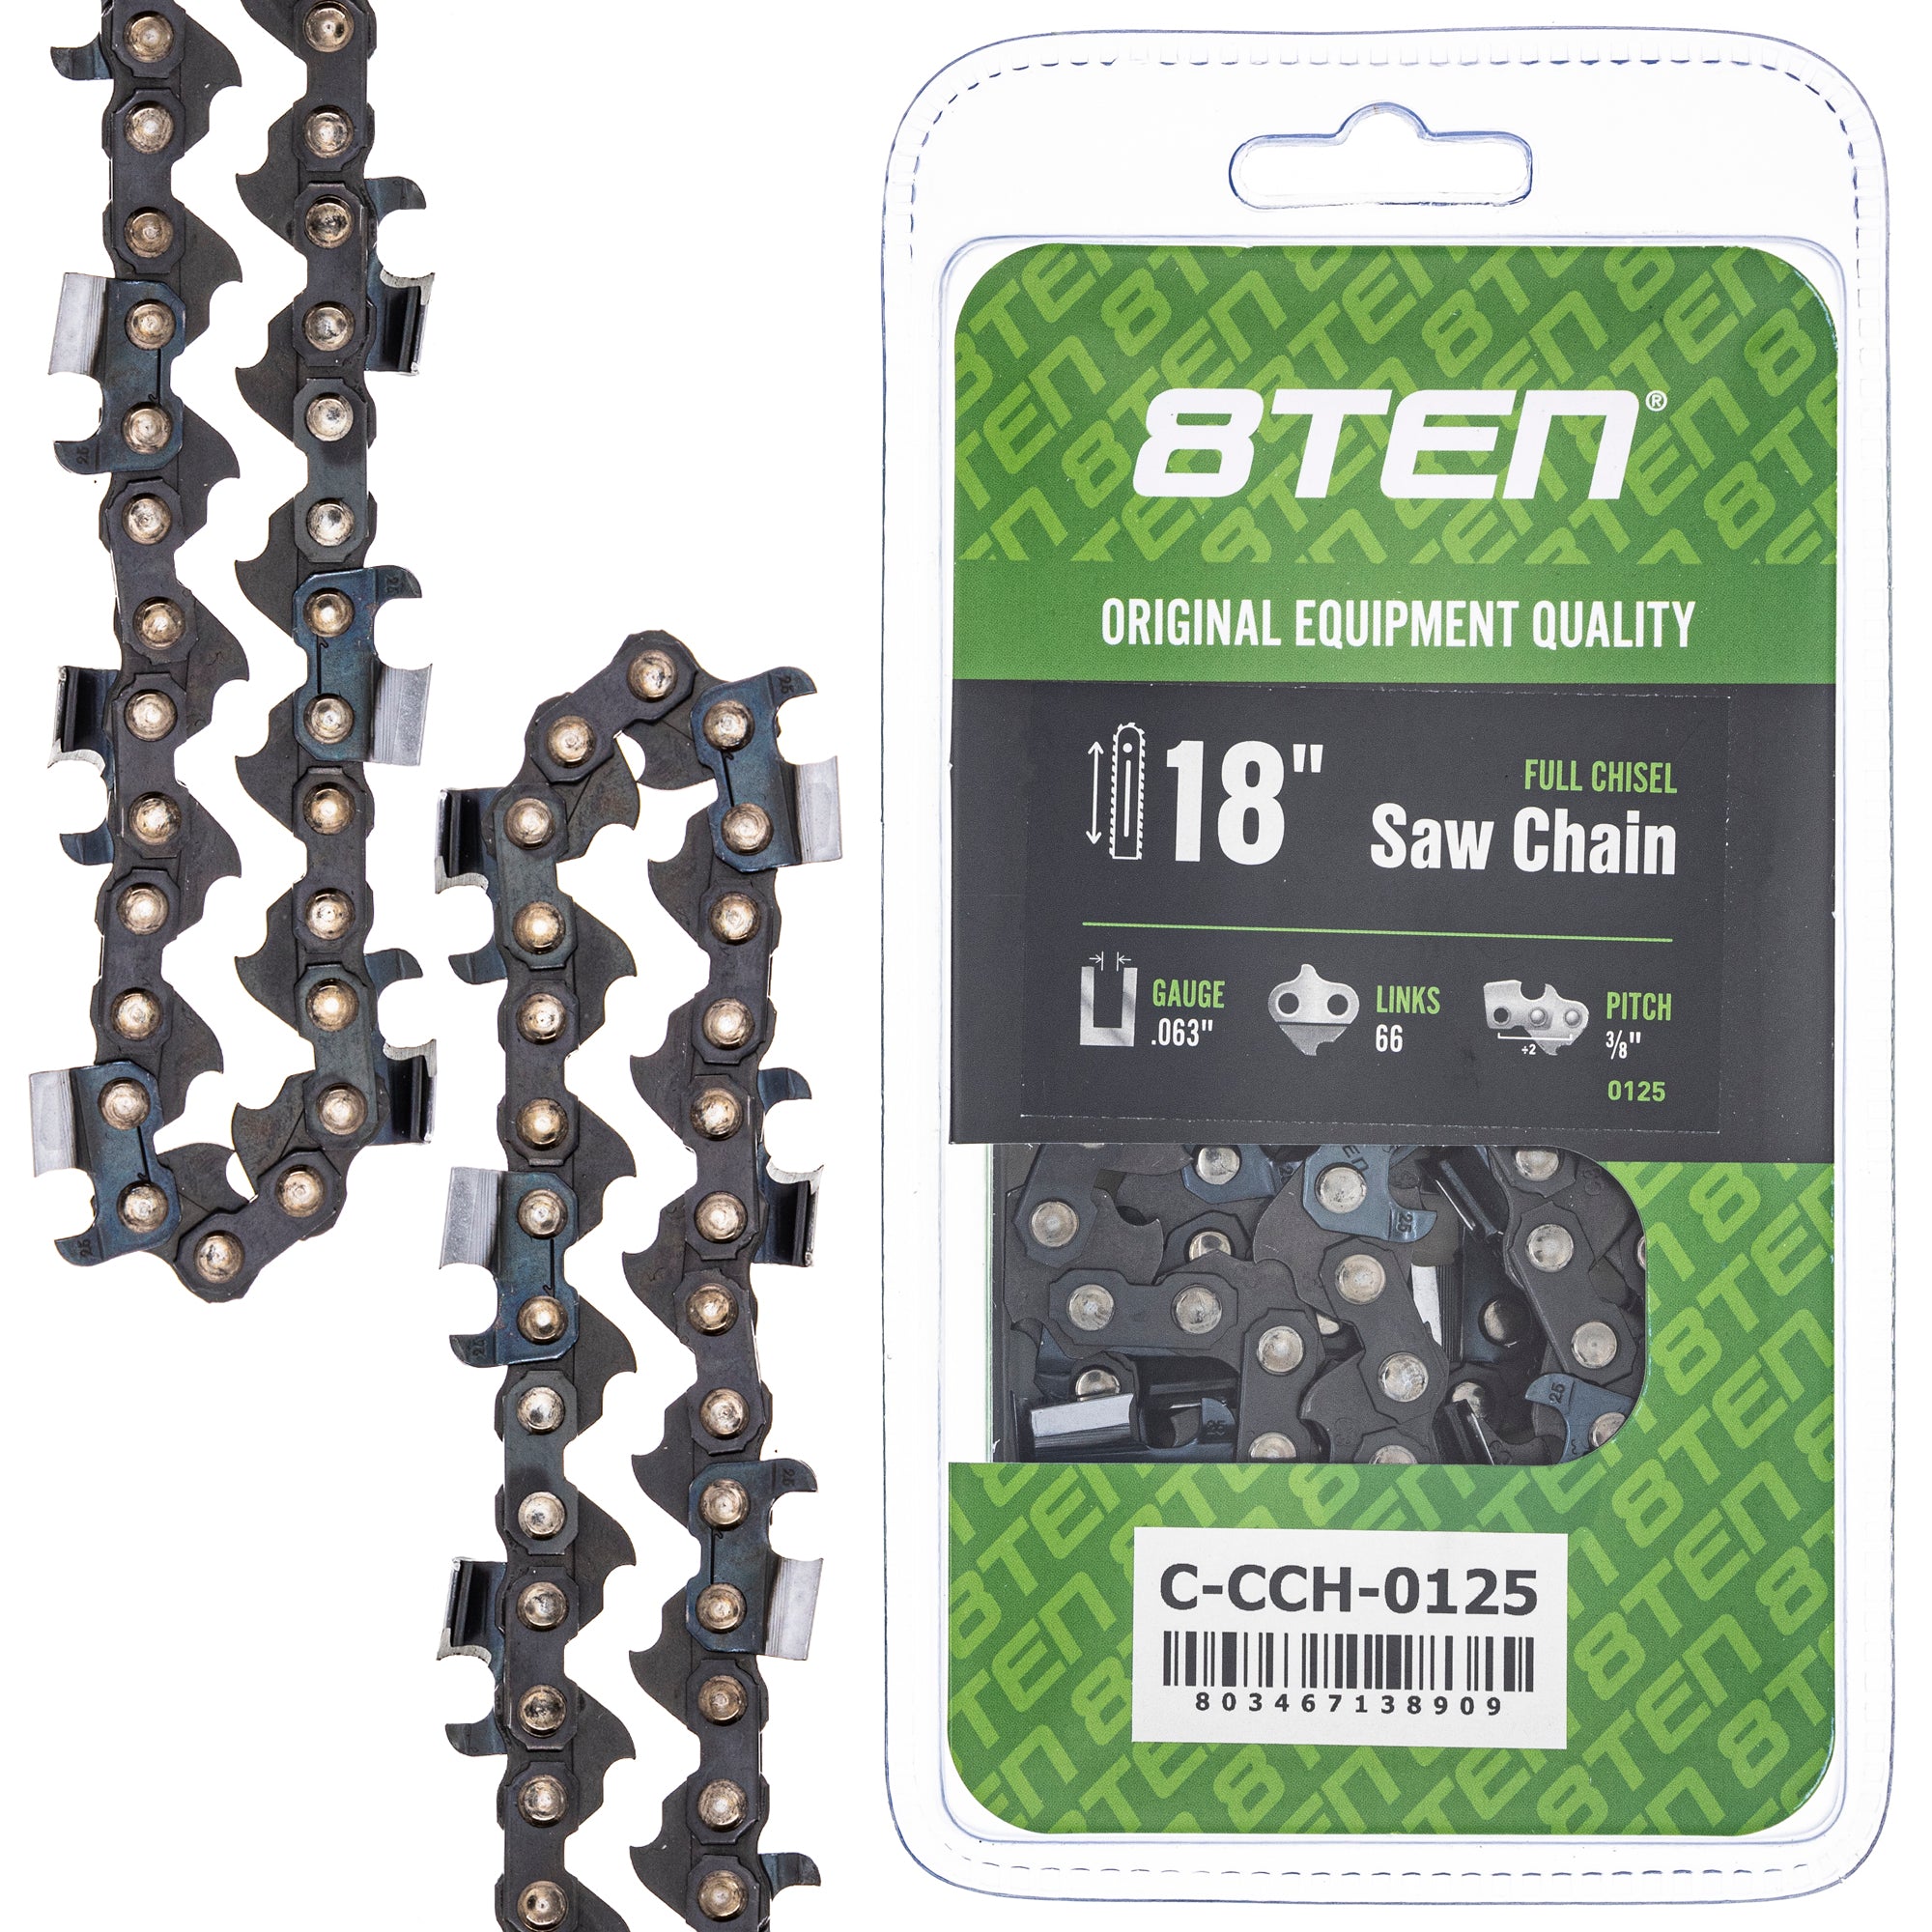 Chainsaw Chain 18 Inch .063 3/8 66DL for MSE MS E 066 8TEN 810-CCC2347H